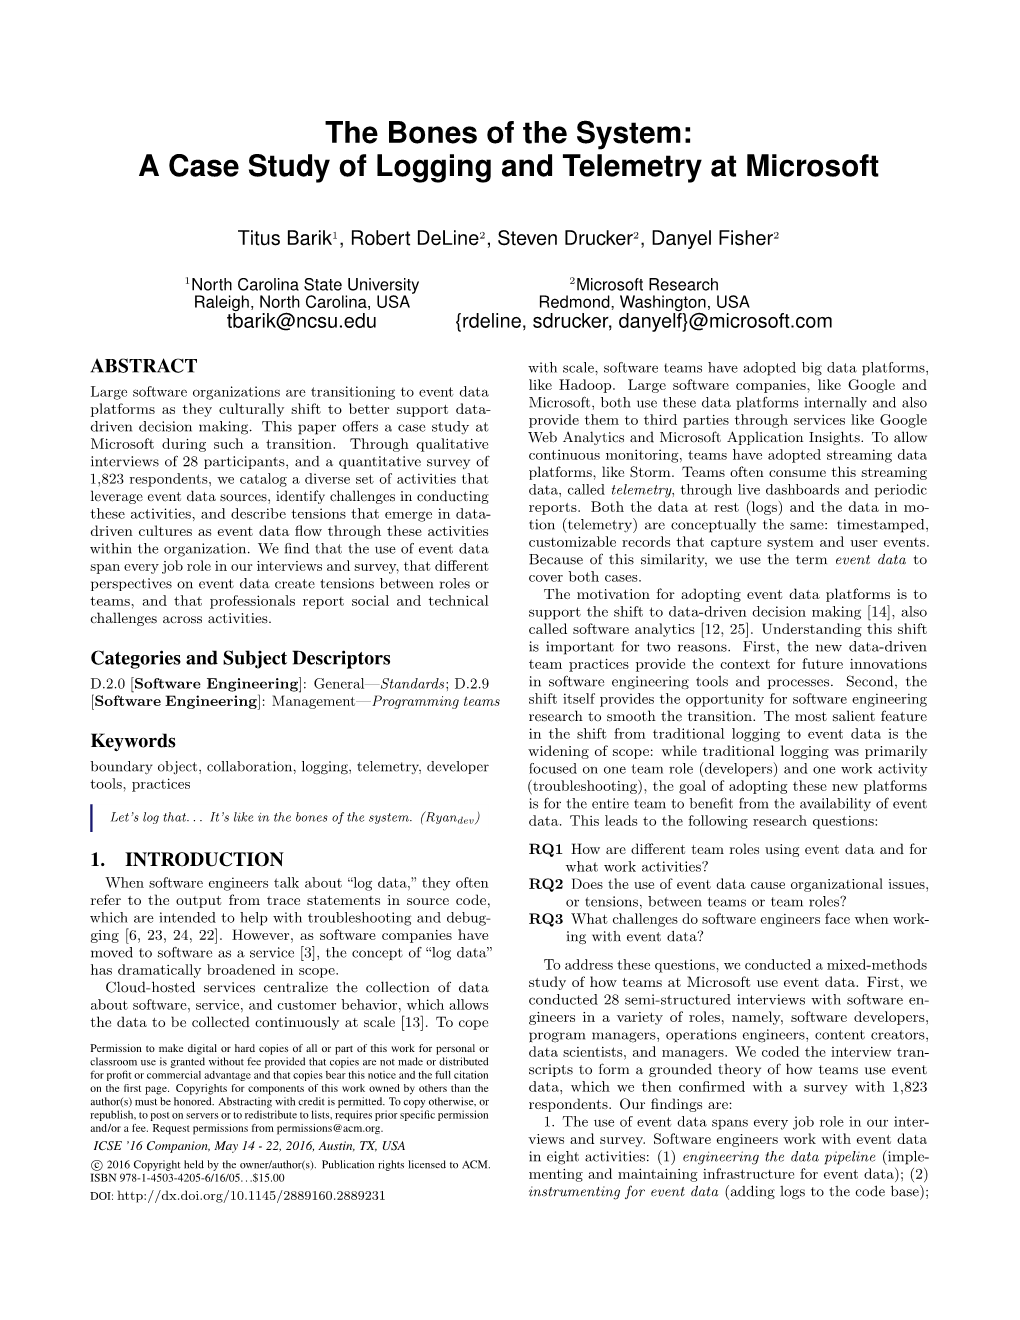 A Case Study of Logging and Telemetry at Microsoft